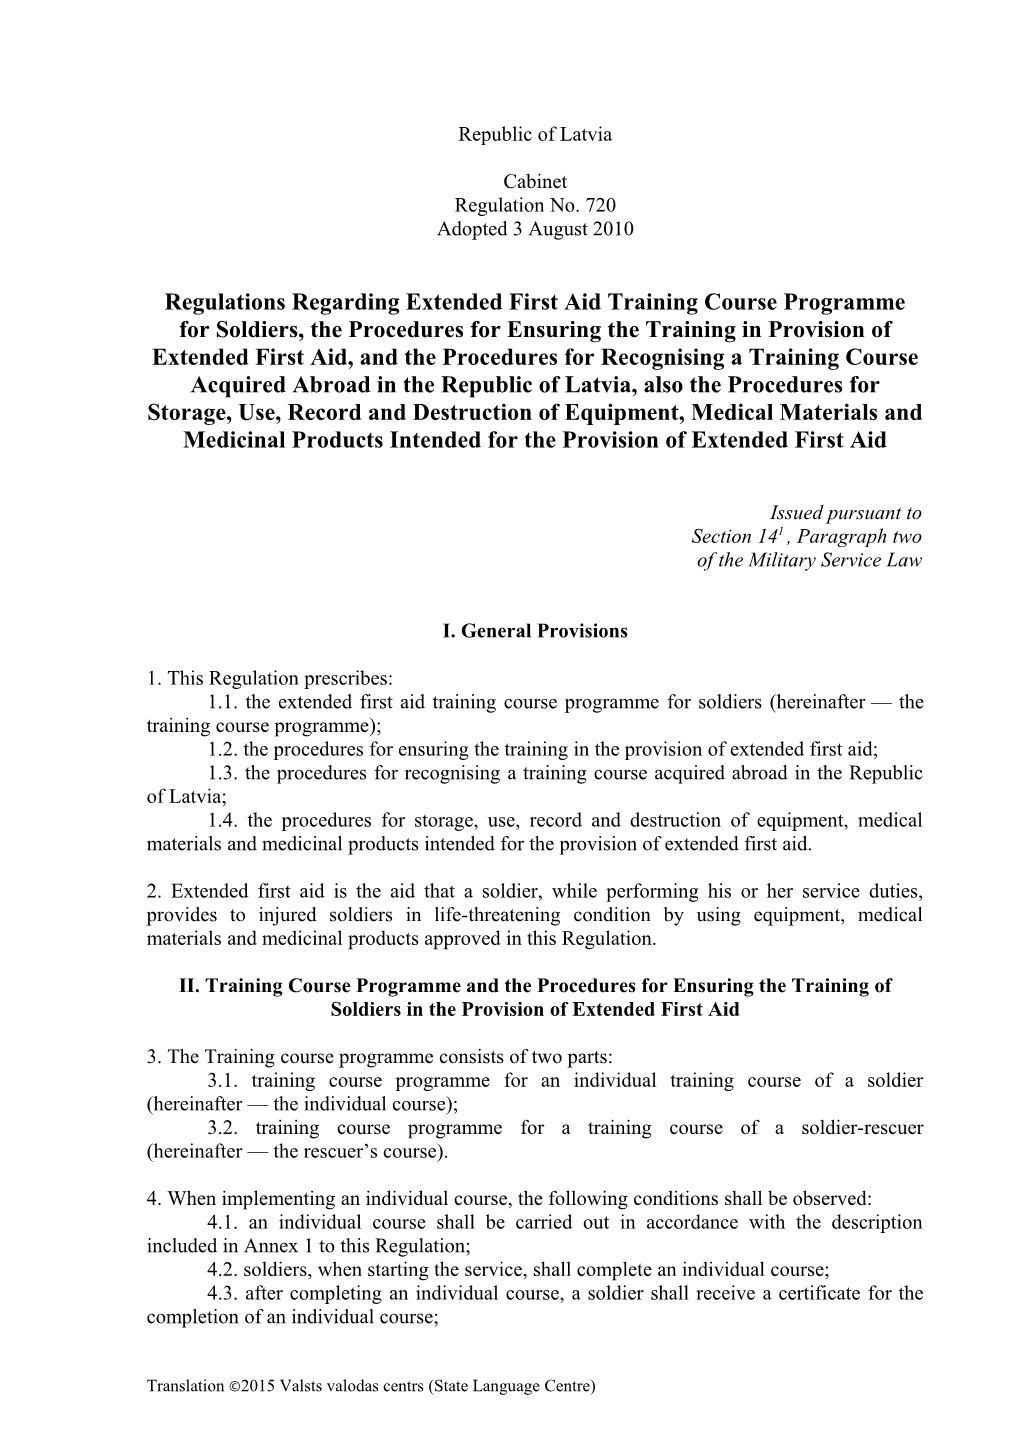 Regulations Regarding Extended First Aid Training Course Programme for Soldiers, the Procedures